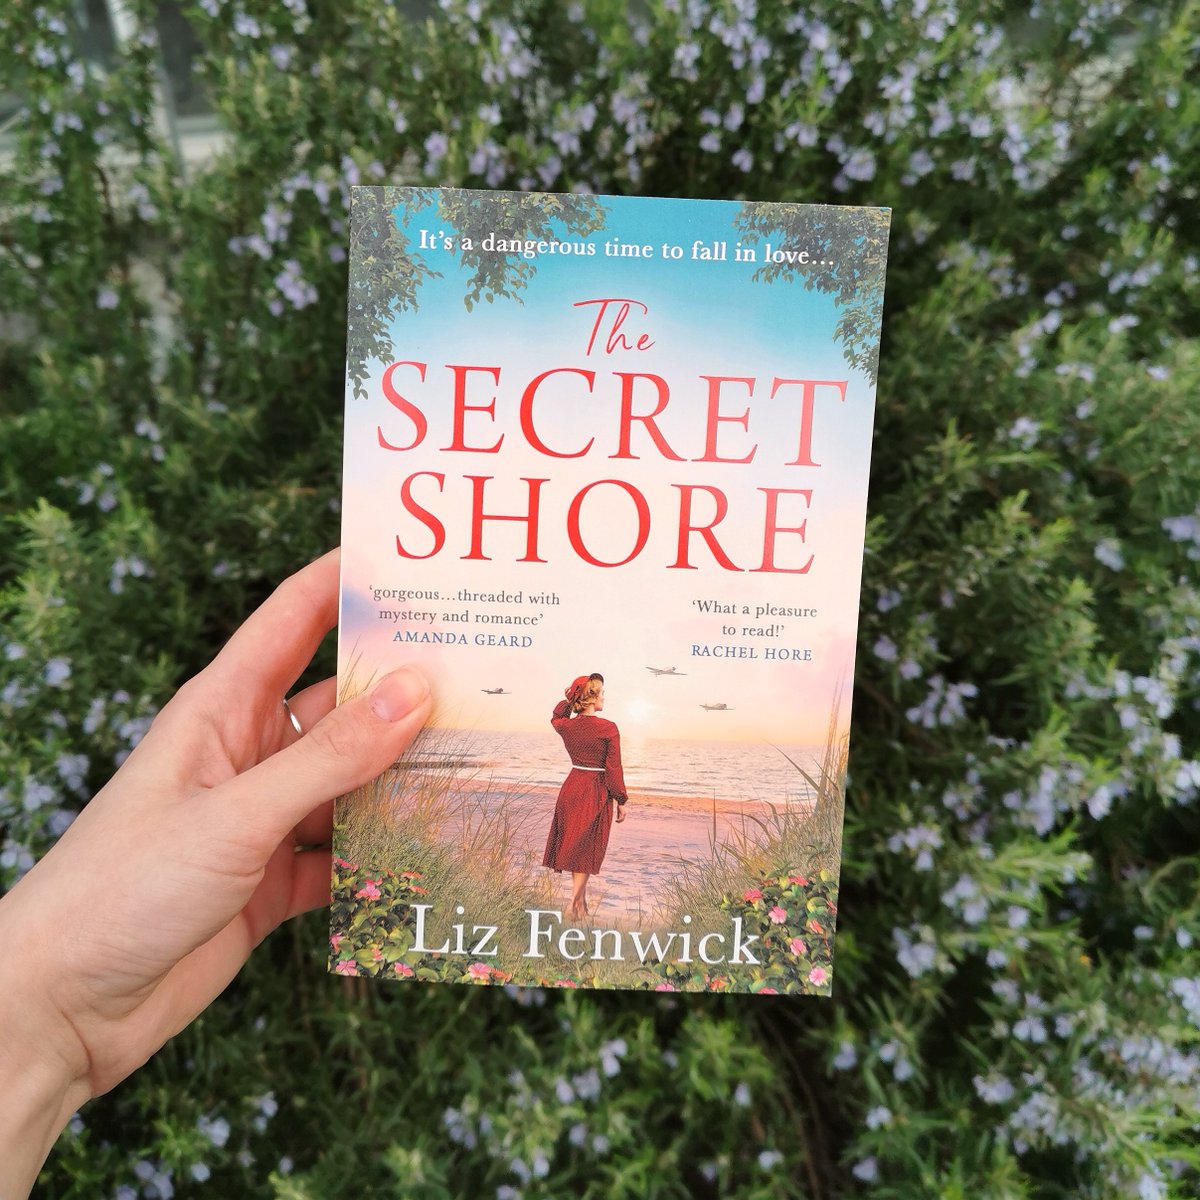 Readers LOVE #TheSecretShore by @liz_fenwick 🤍 'An epic story of danger, courage and love in times of uncertainty' ⭐⭐⭐⭐⭐ 'Heartwarming and tragic' ⭐⭐⭐⭐⭐ 'Just read it!' ⭐⭐⭐⭐⭐ Find out more: ow.ly/mewi50Rp78U